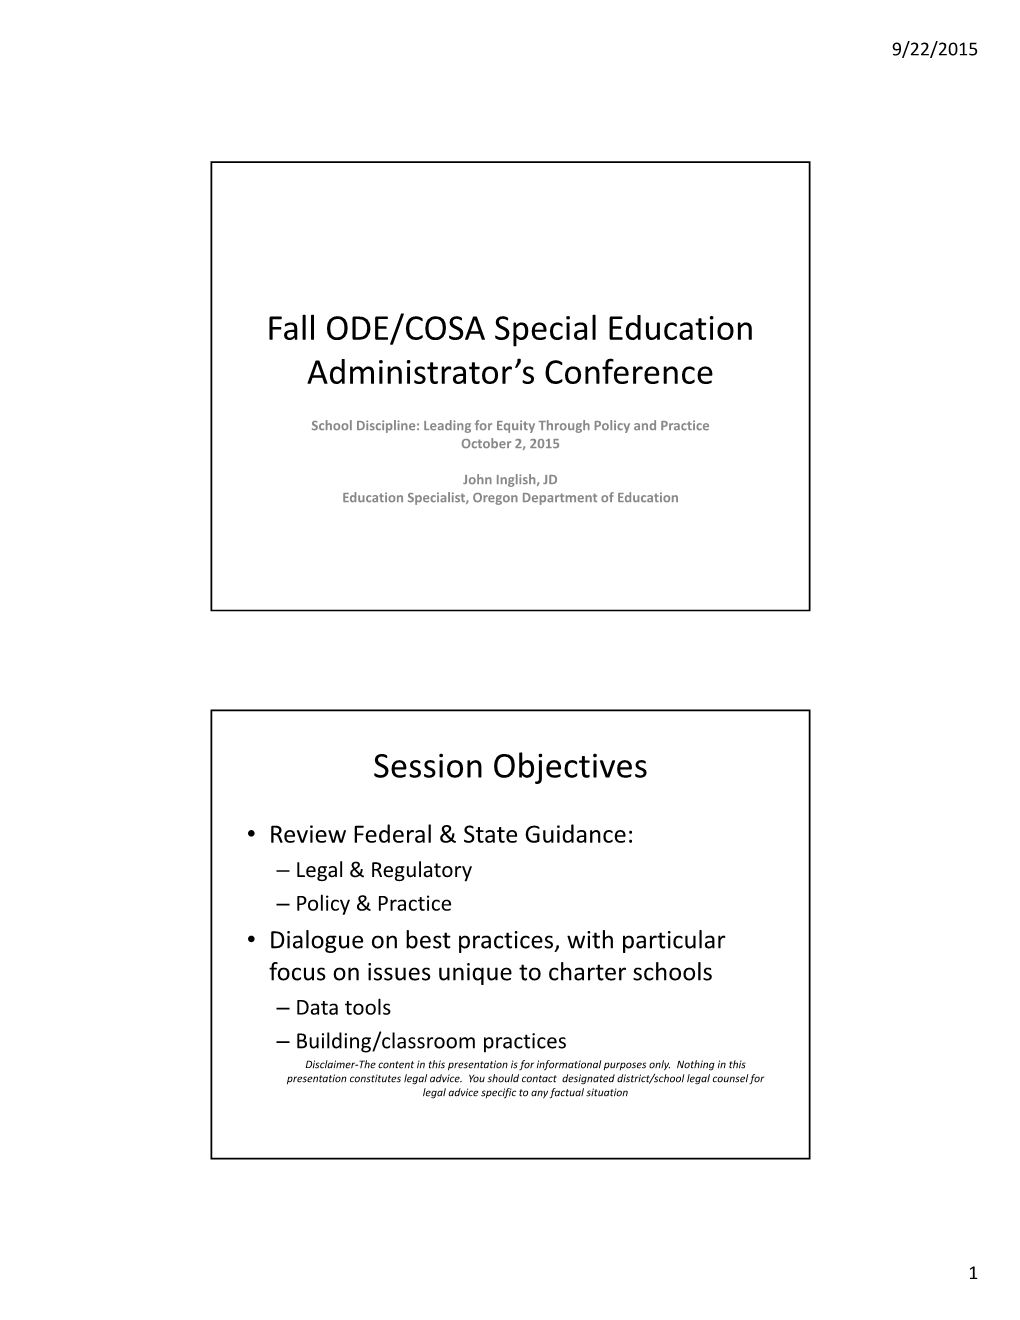 Fall ODE/COSA Special Education Administrator's Conference Session